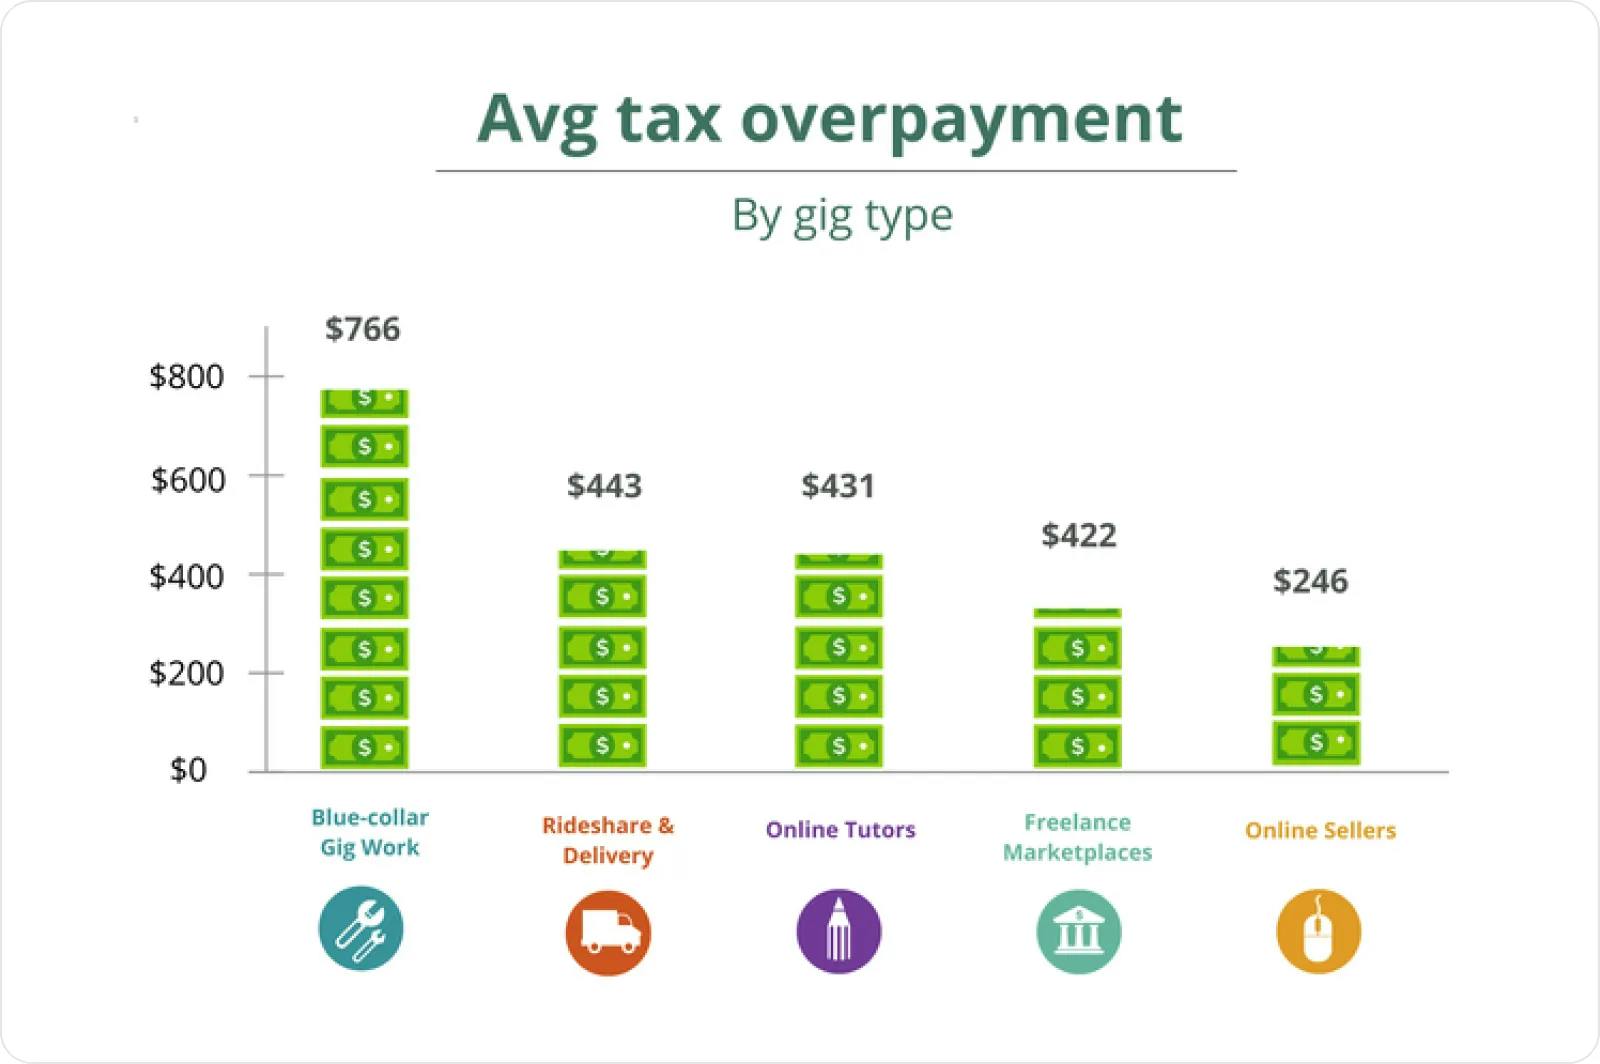 Avg tax overpayment by gig type